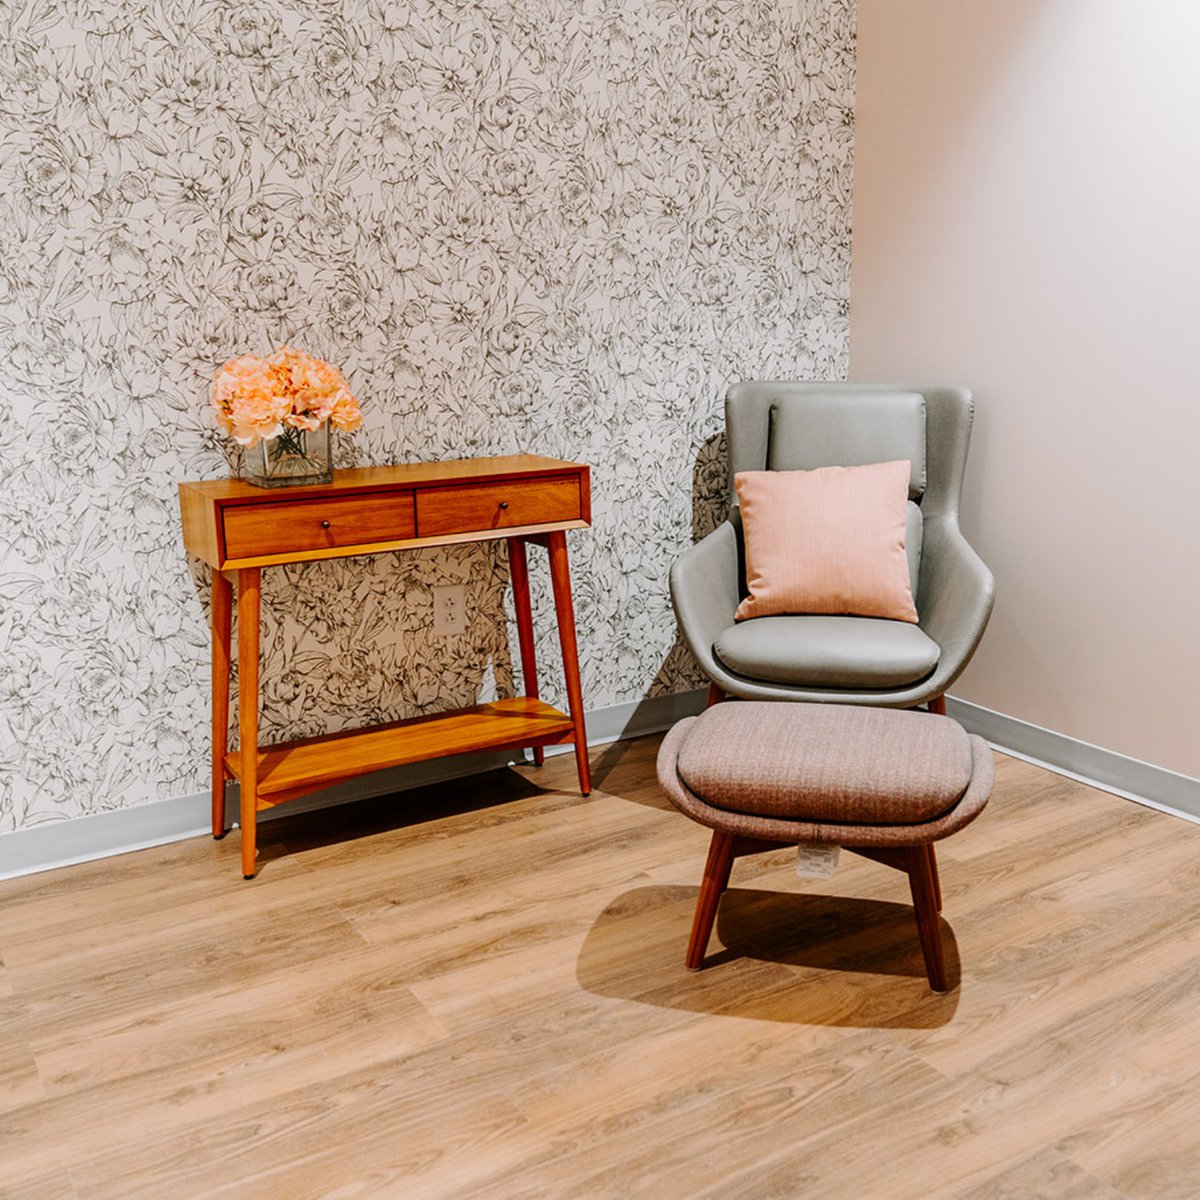 The Club at Crosspoint is committed to supporting working mothers and happy to offer this calm, private Mothers' Suite. Bring balance back to your life here at The Club. #Coworking #WorkingMom #MomsWhoWork #BusyMom #Indianapolis #NowOpen #IndianapolisCoworking